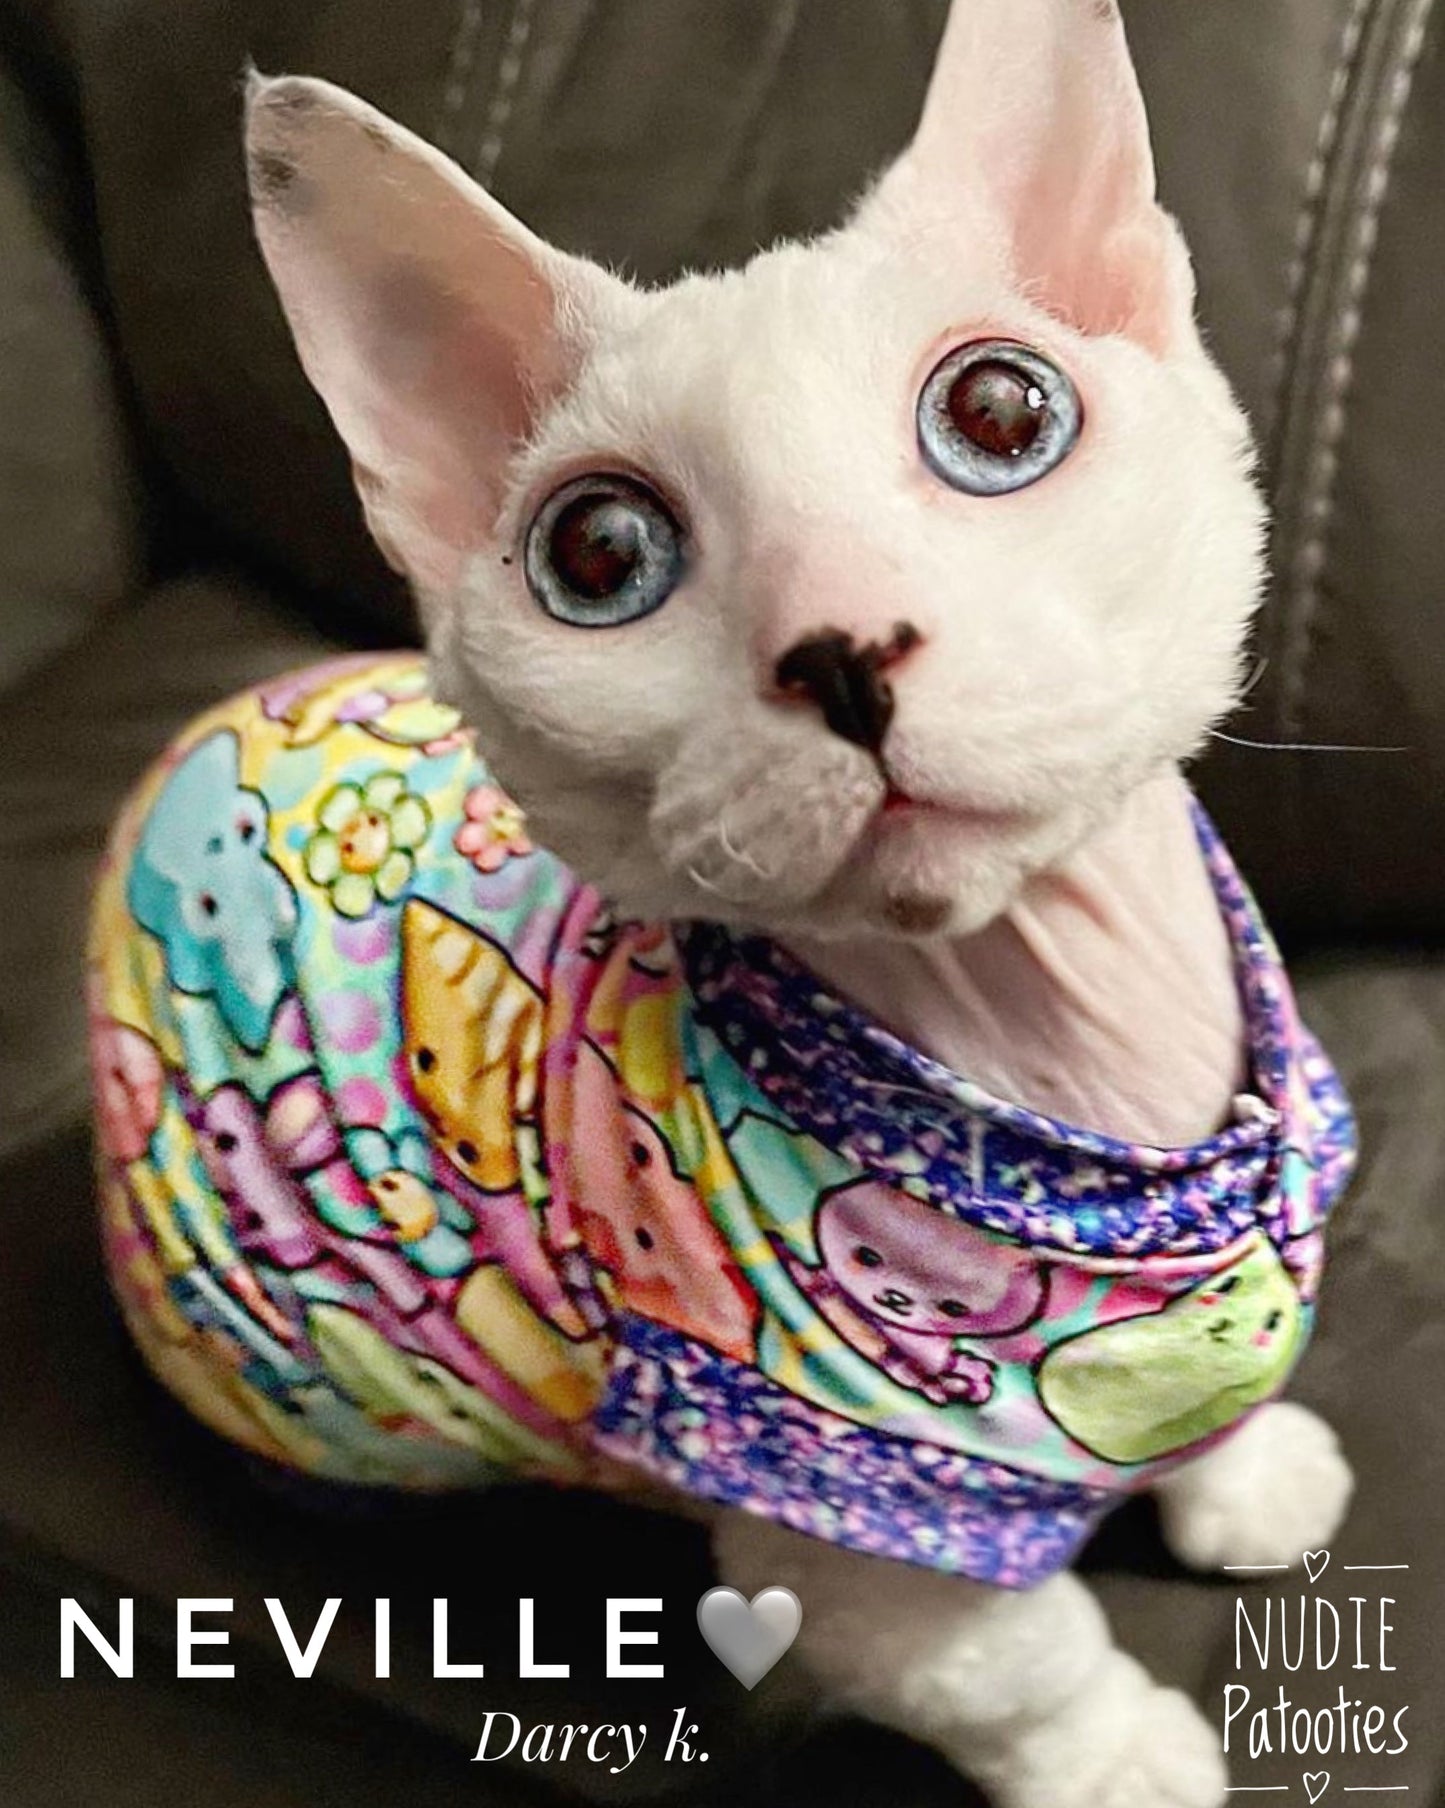 Sphynx cat and kitten shirt. Sphynx cat clothes.